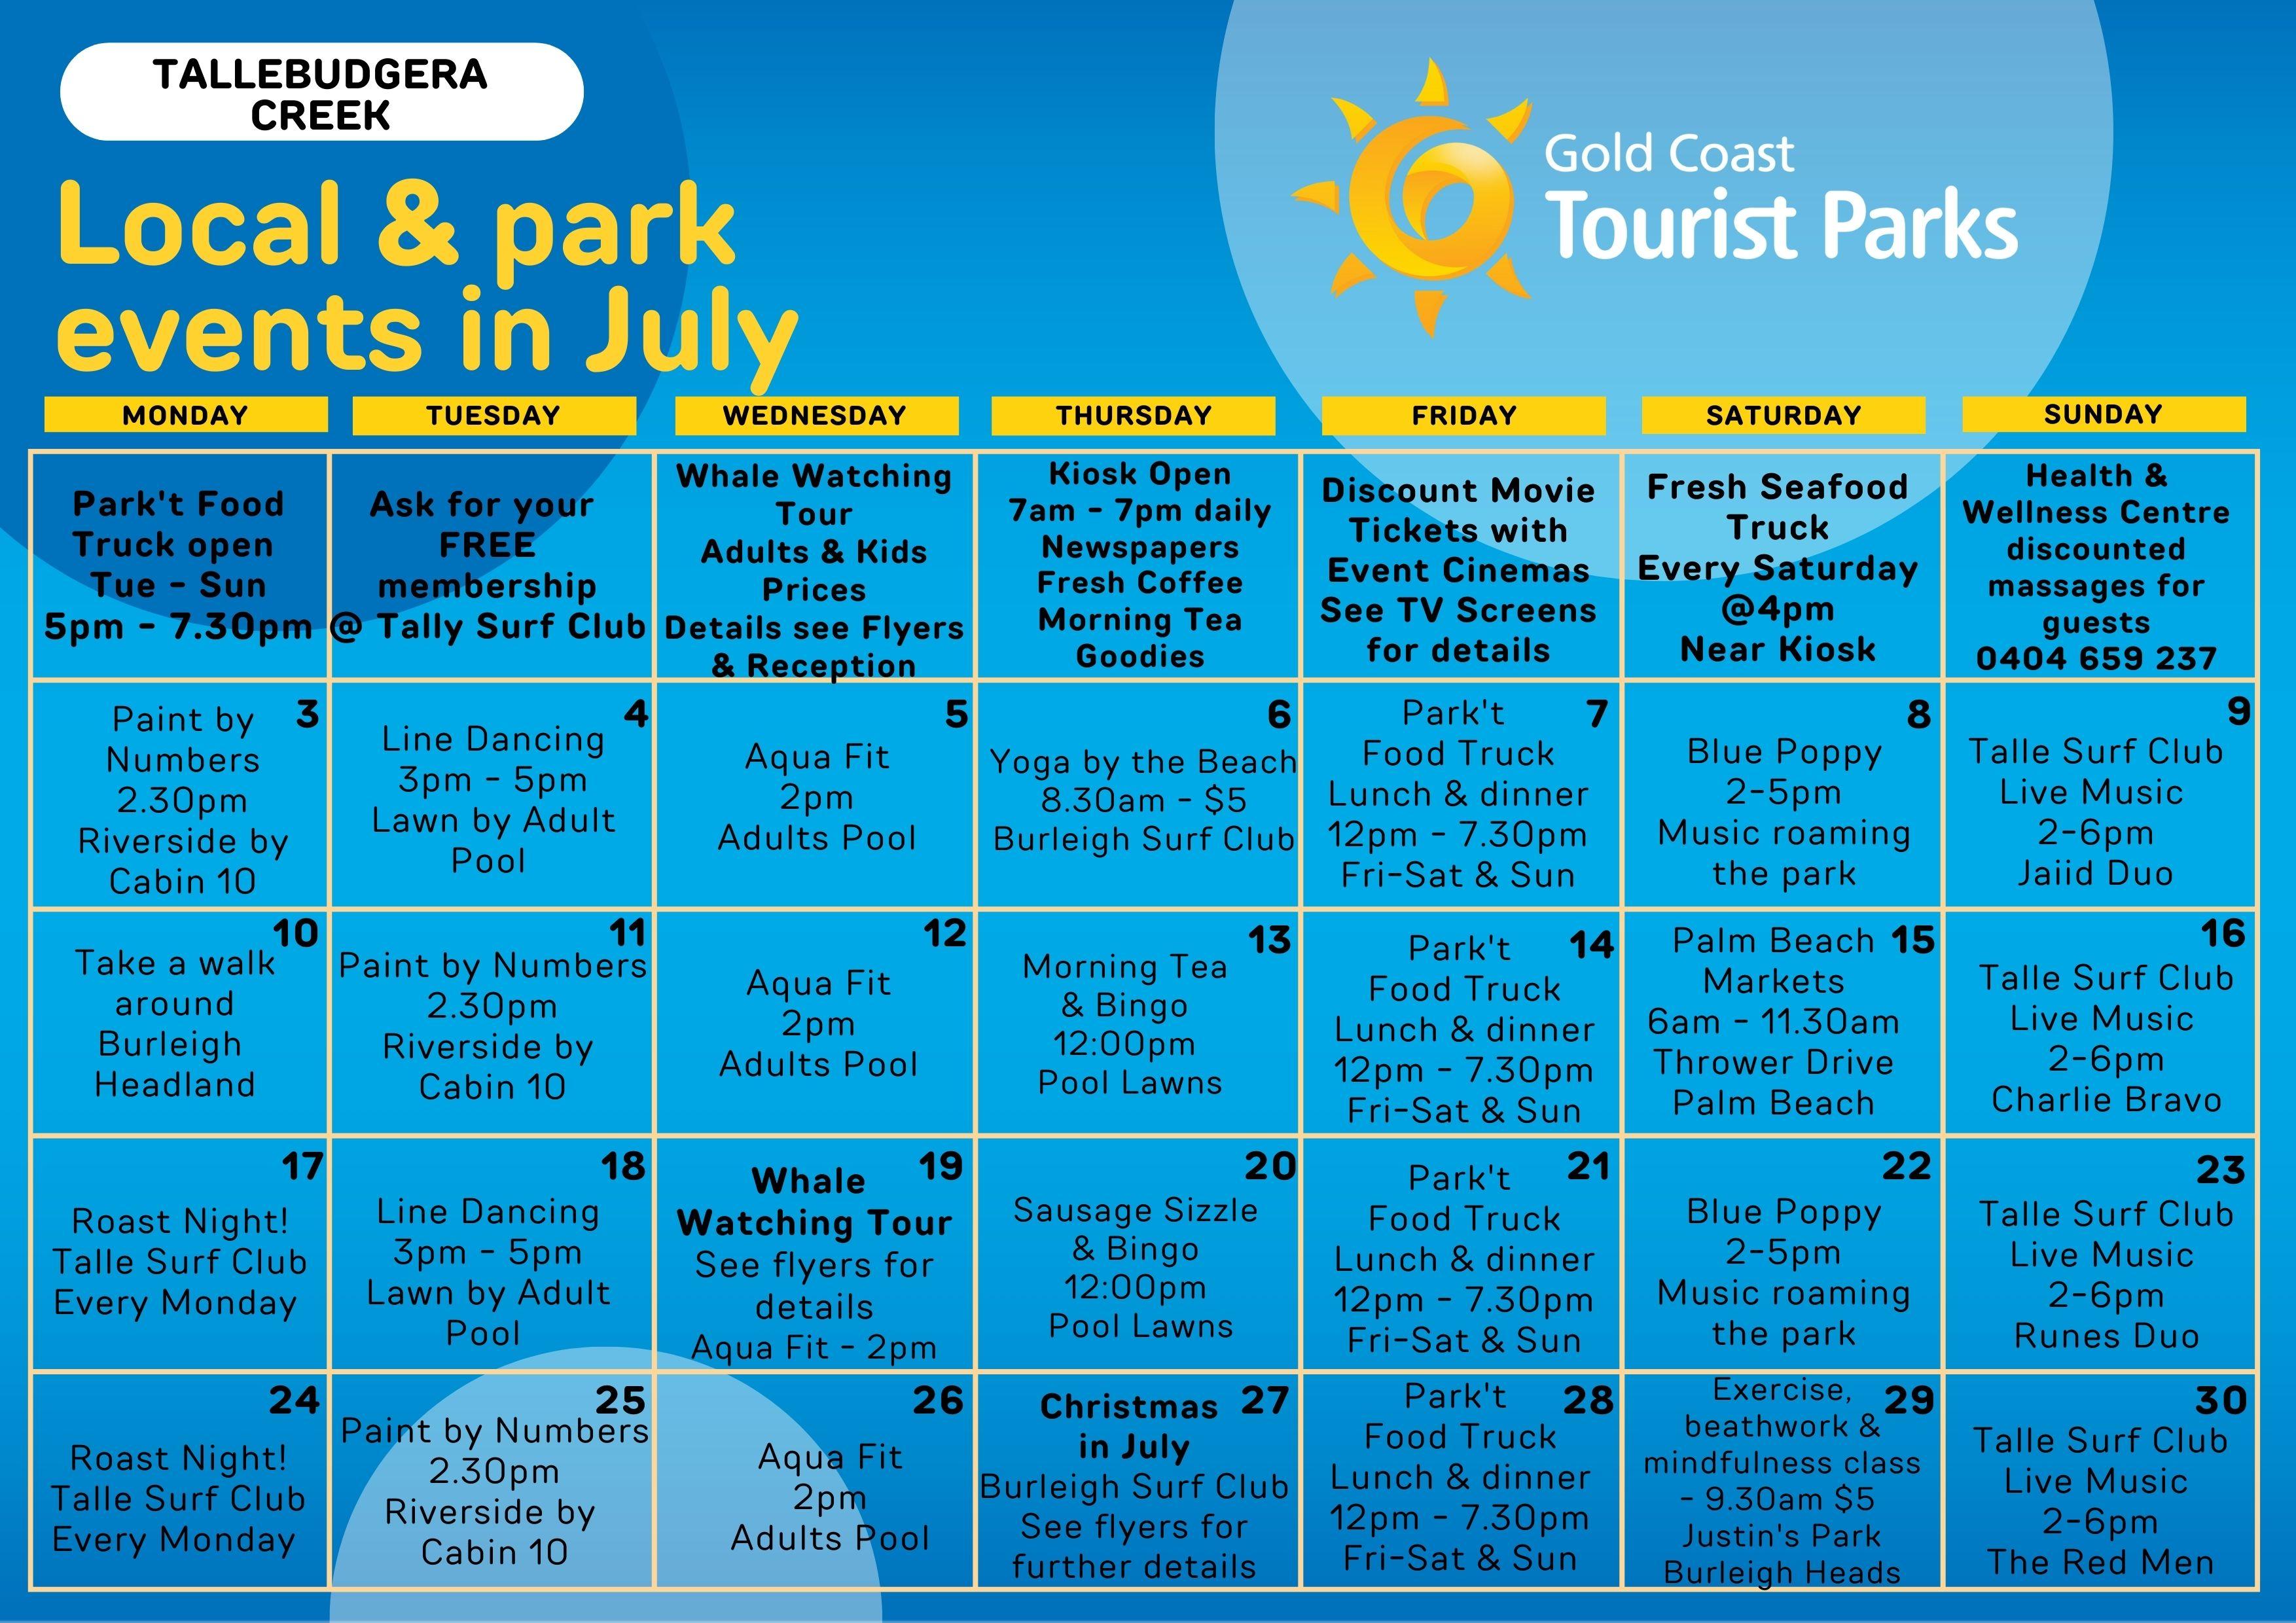 Our full July Events Calendar